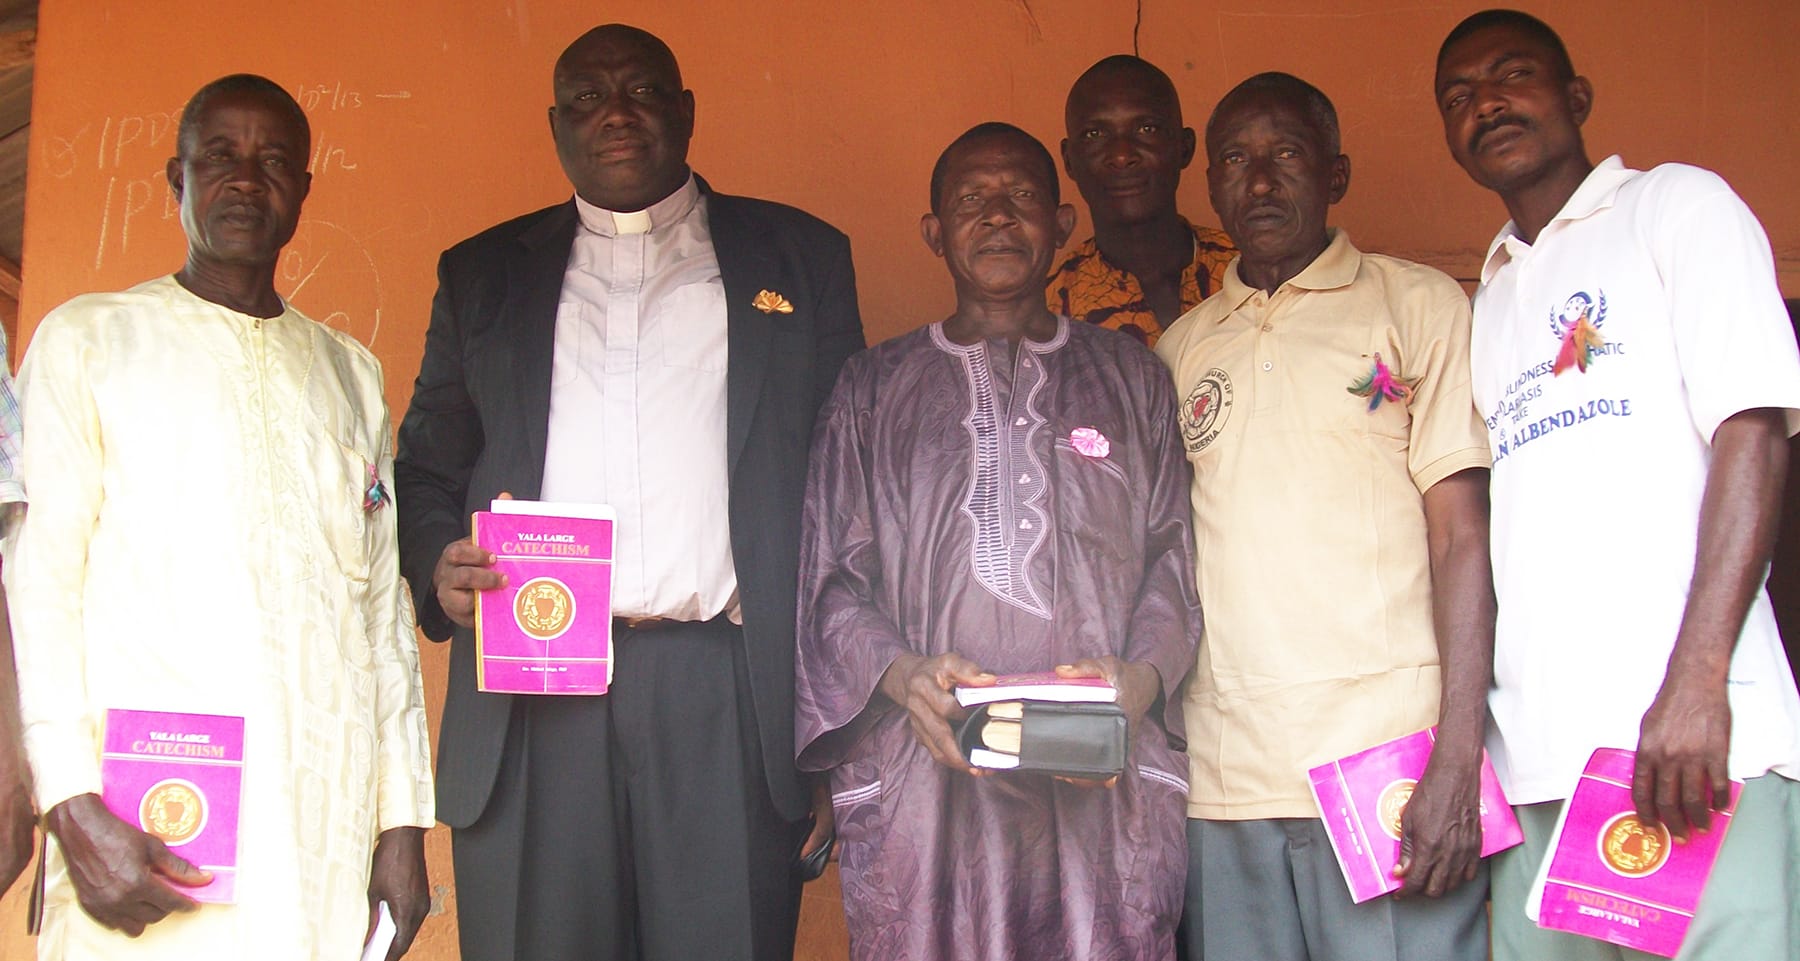 Nigeria Yala Luther's Large Catechism Intro